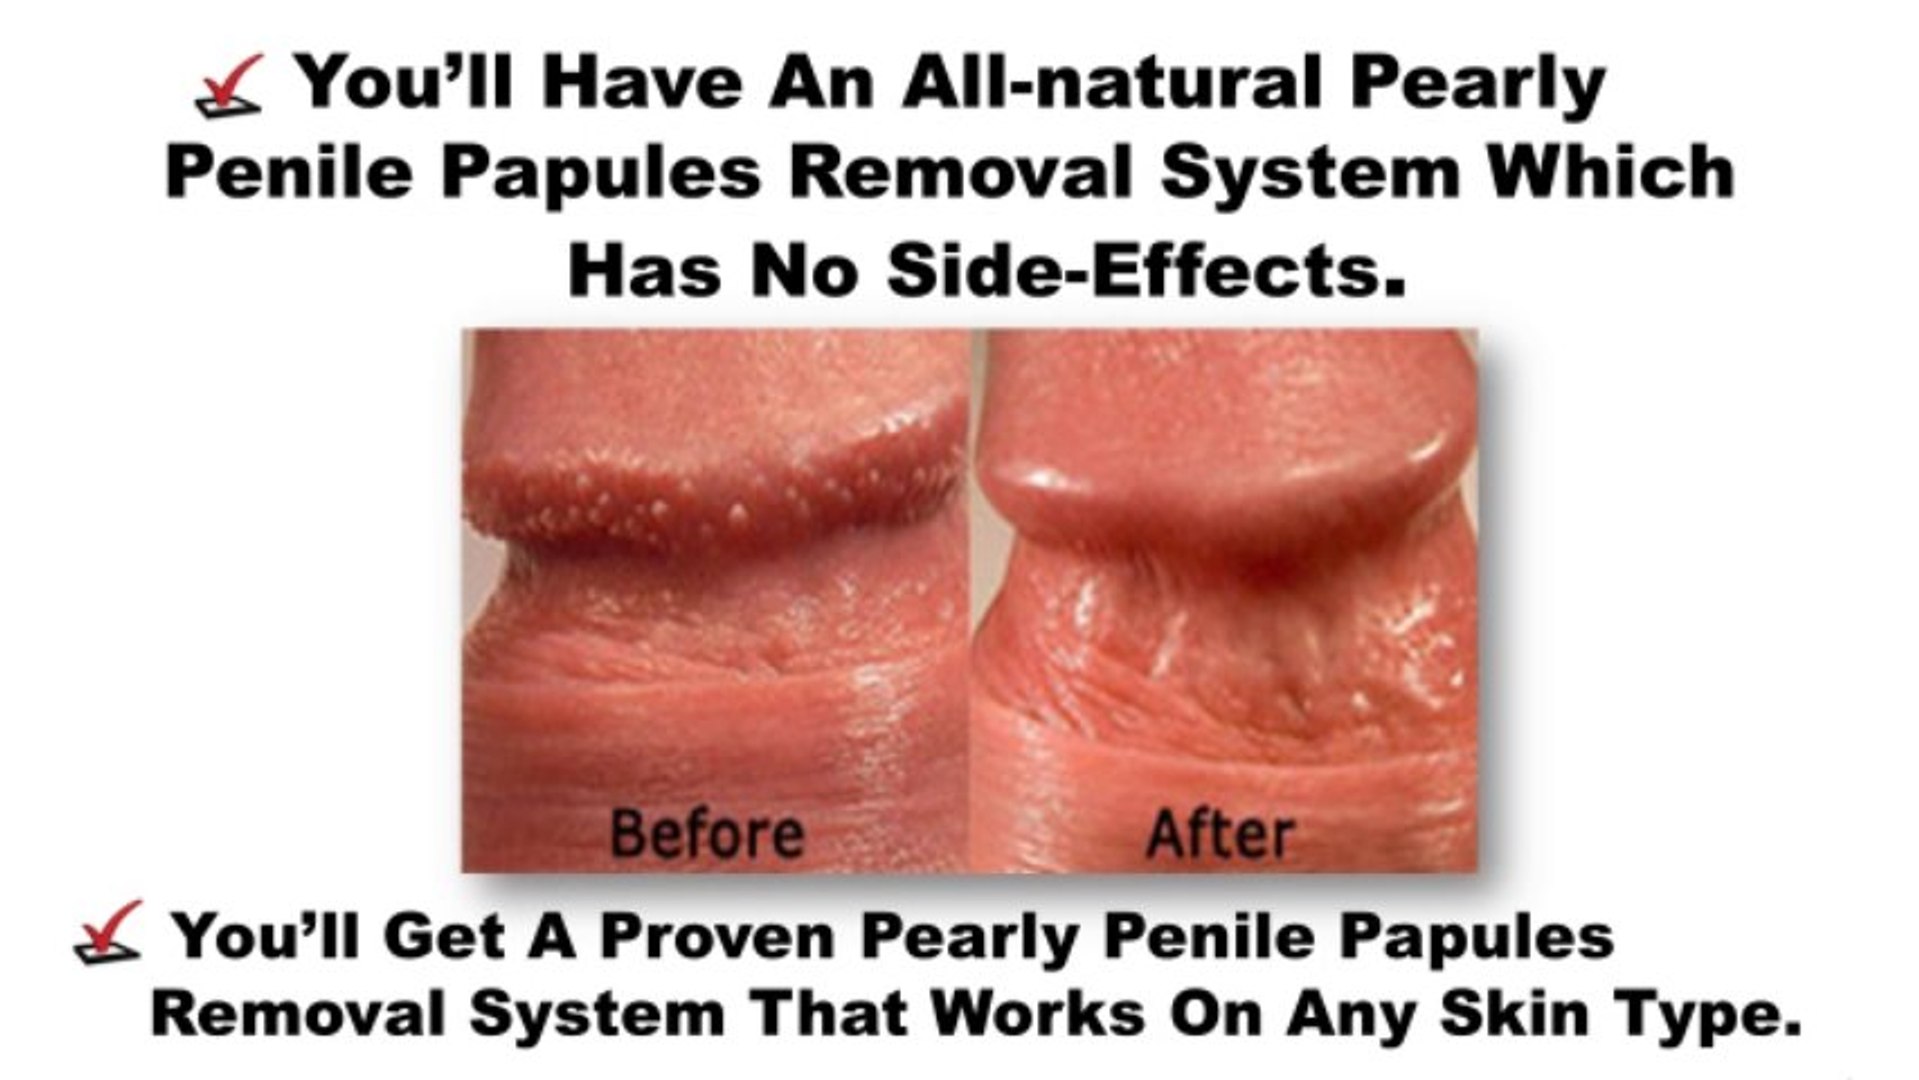 Pearly penile papules treatment cost